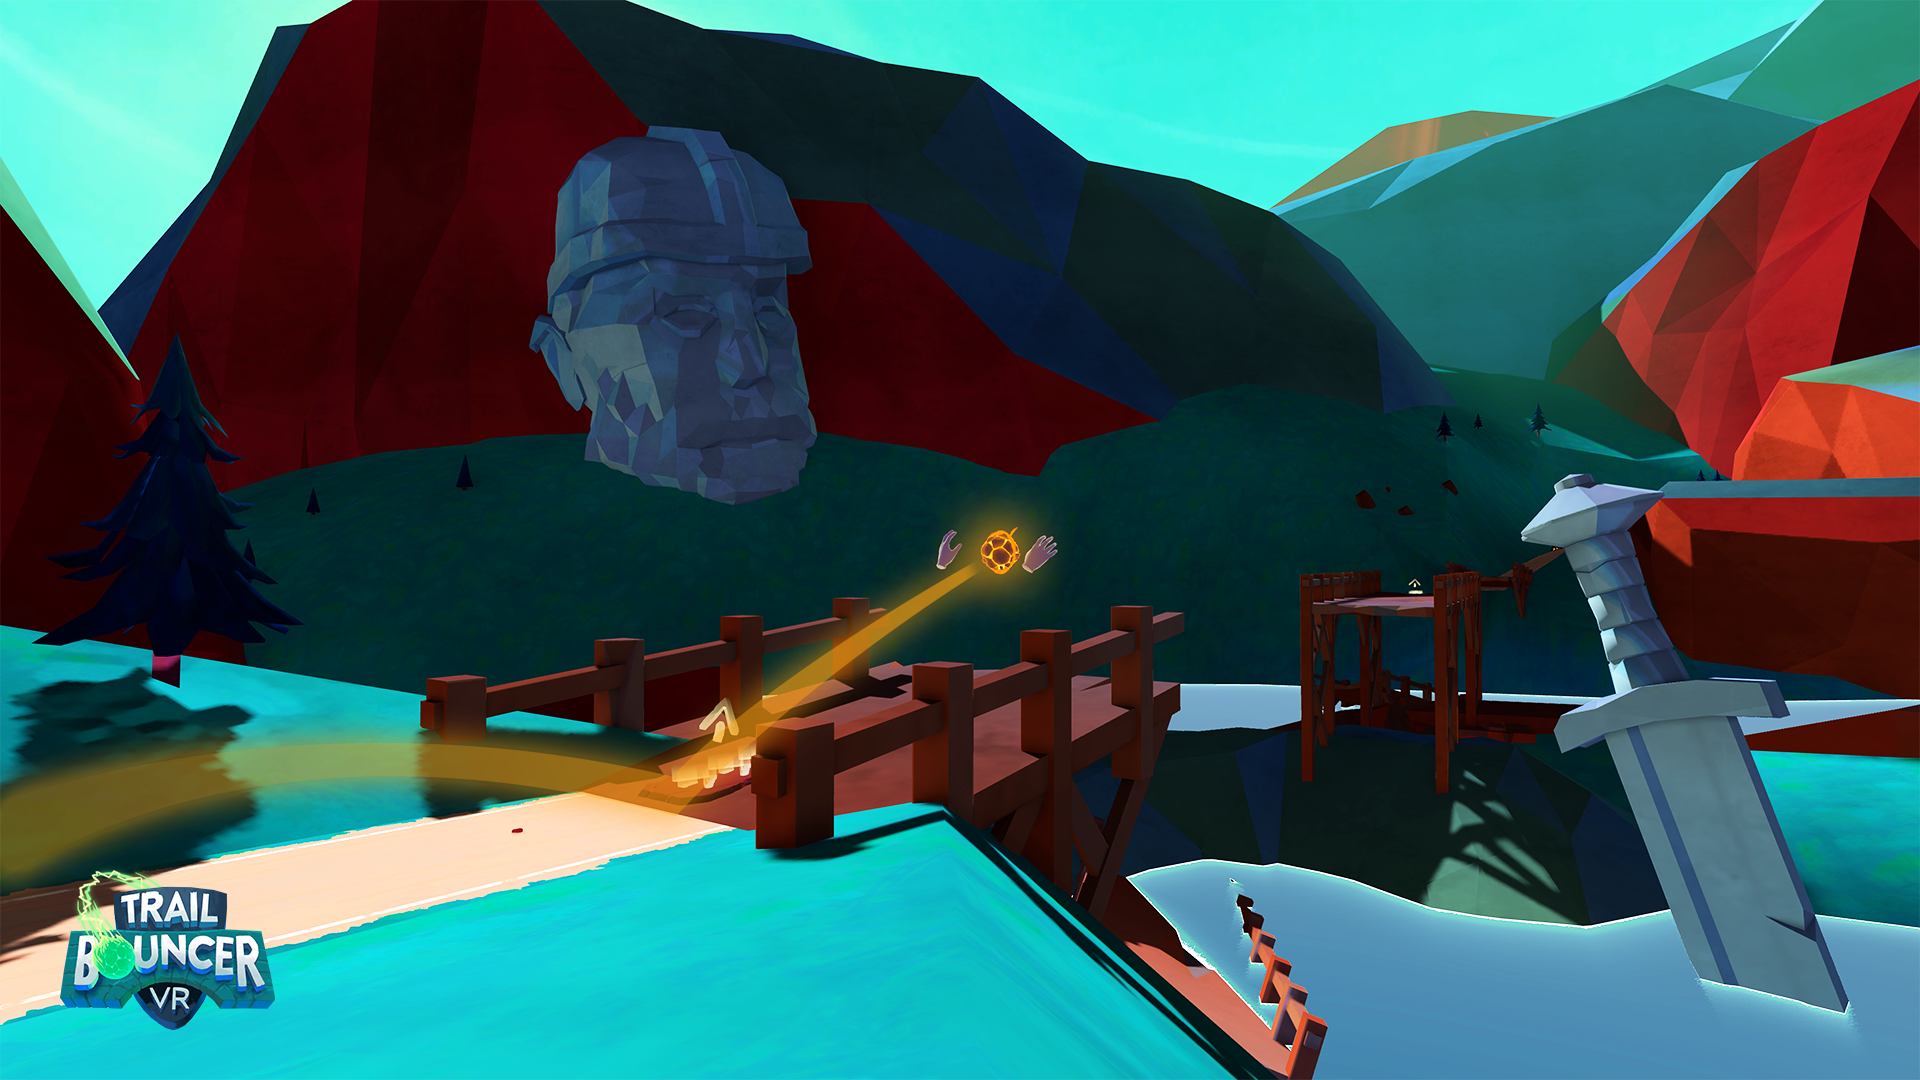 Ingame Screenshot from TrailBouncer VR